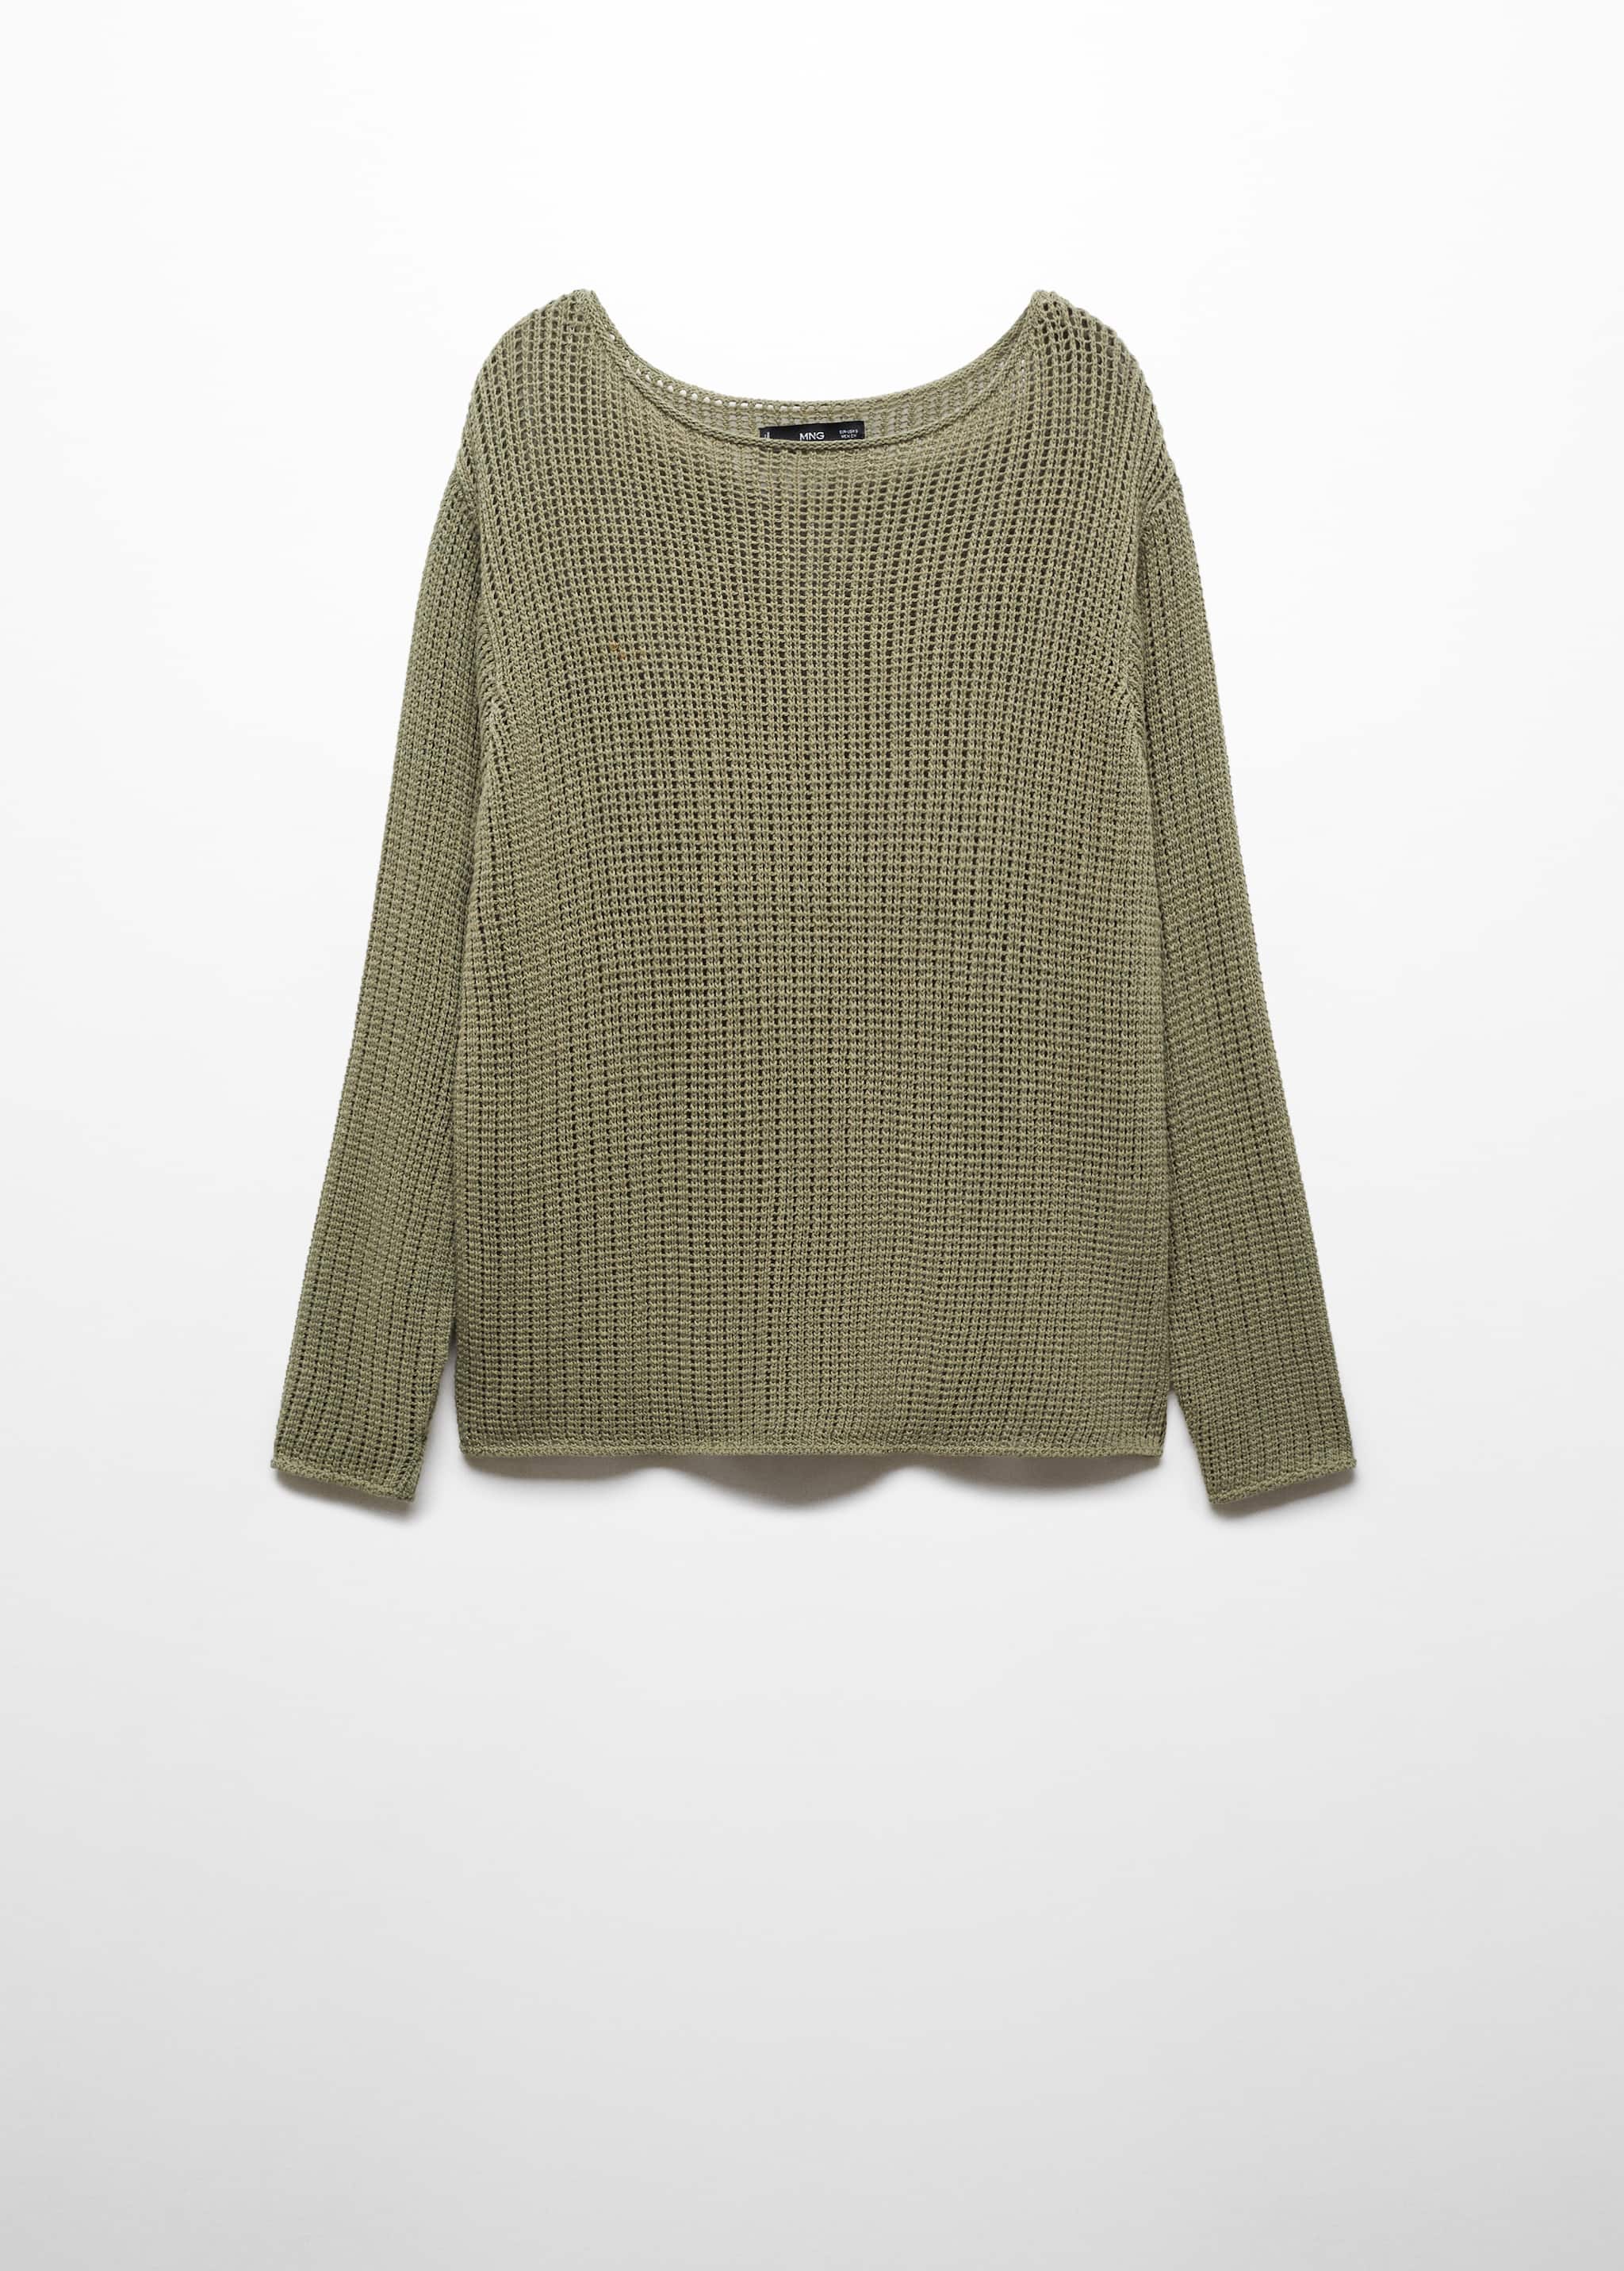 Boat-neck knitted sweater - Article without model